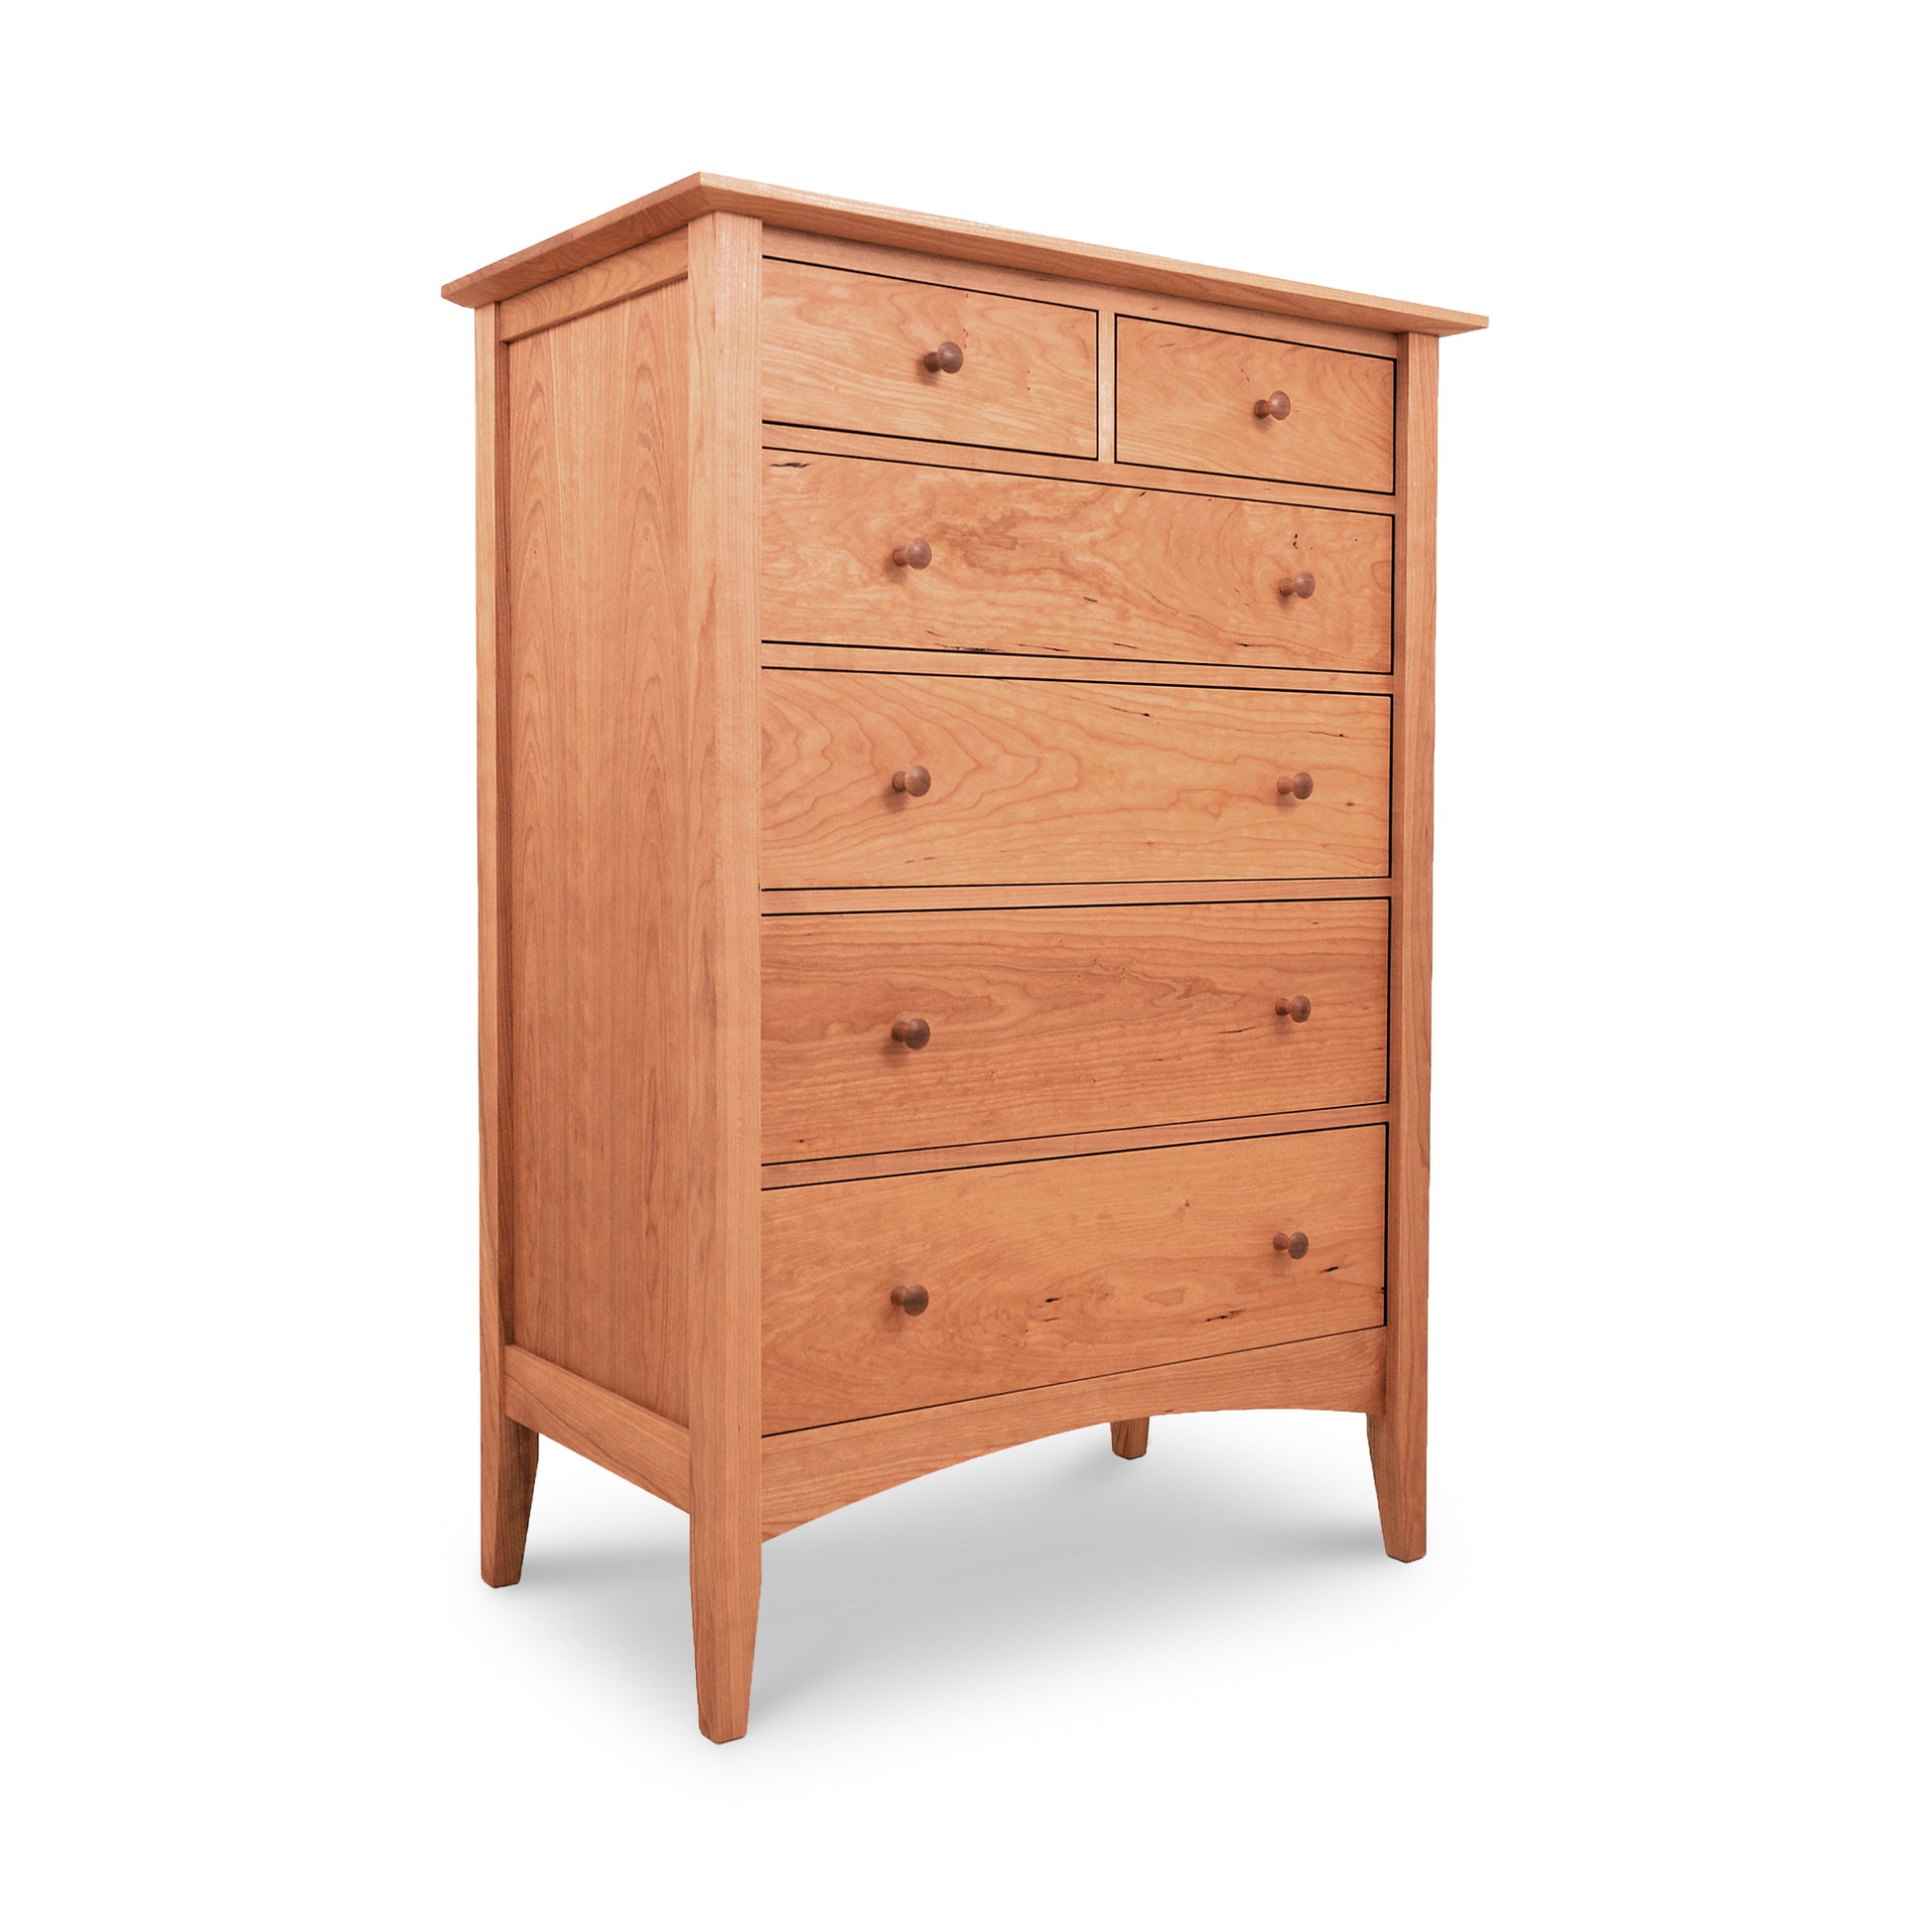 A sustainably-harvested American Shaker 6-Drawer Chest from Maple Corner Woodworks on a white background.